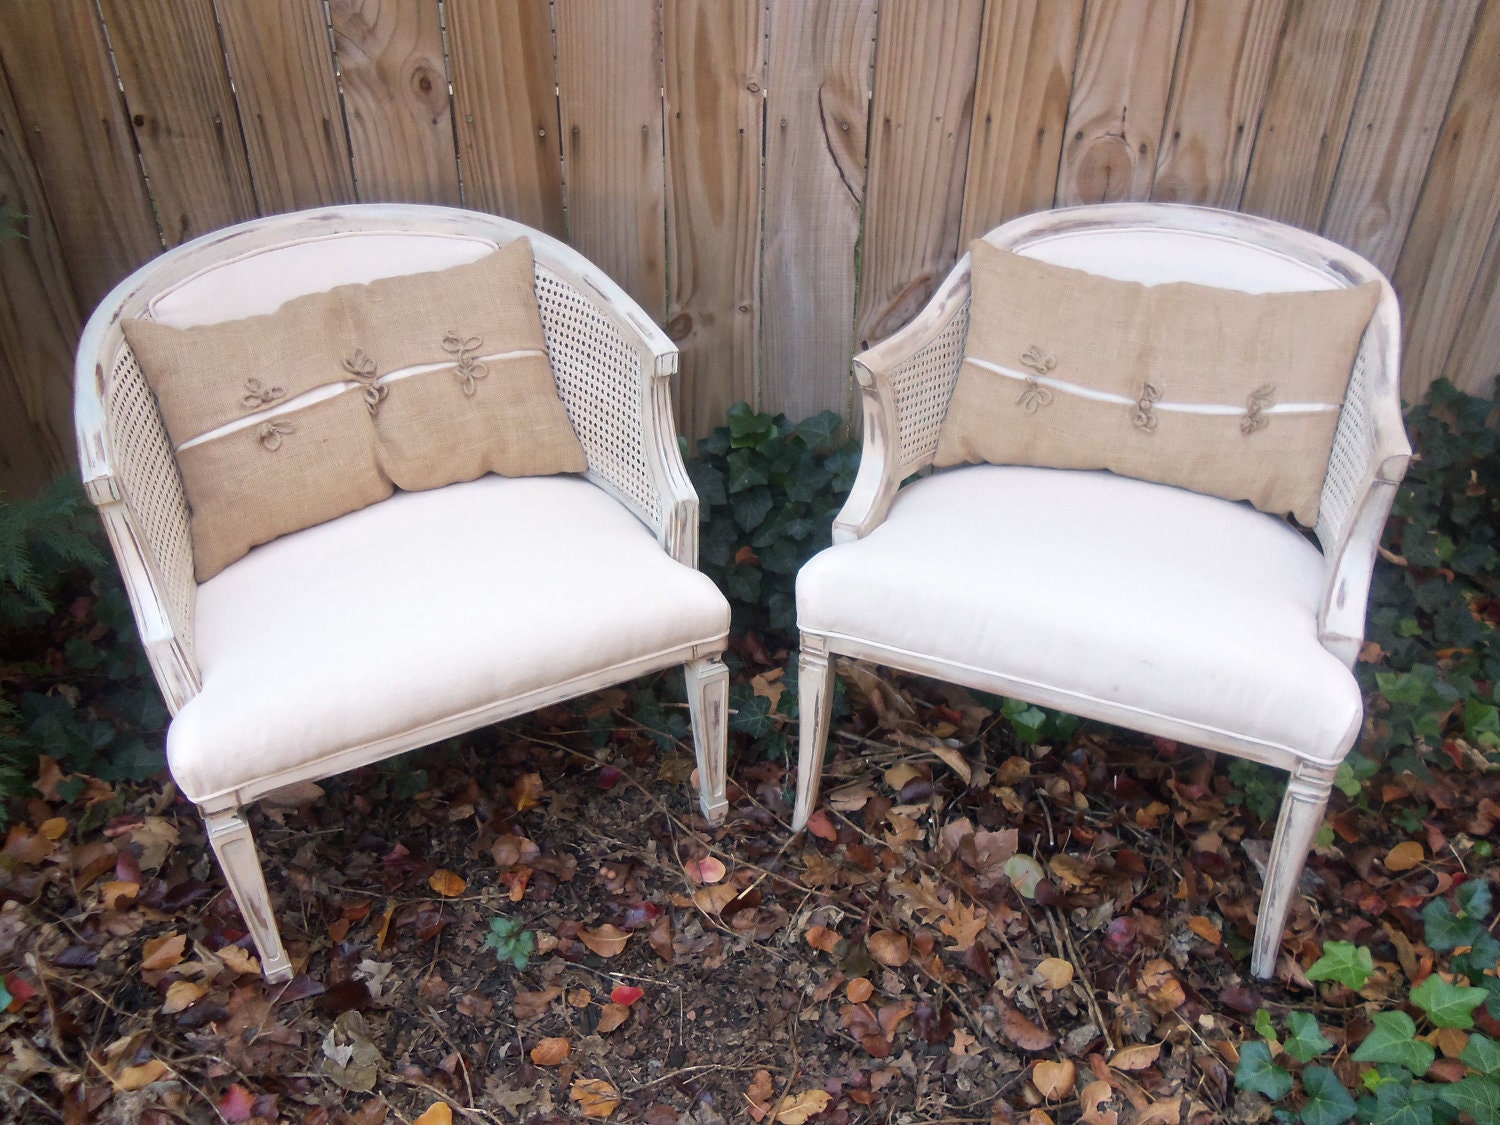 French Provincial cane chairs, set of two